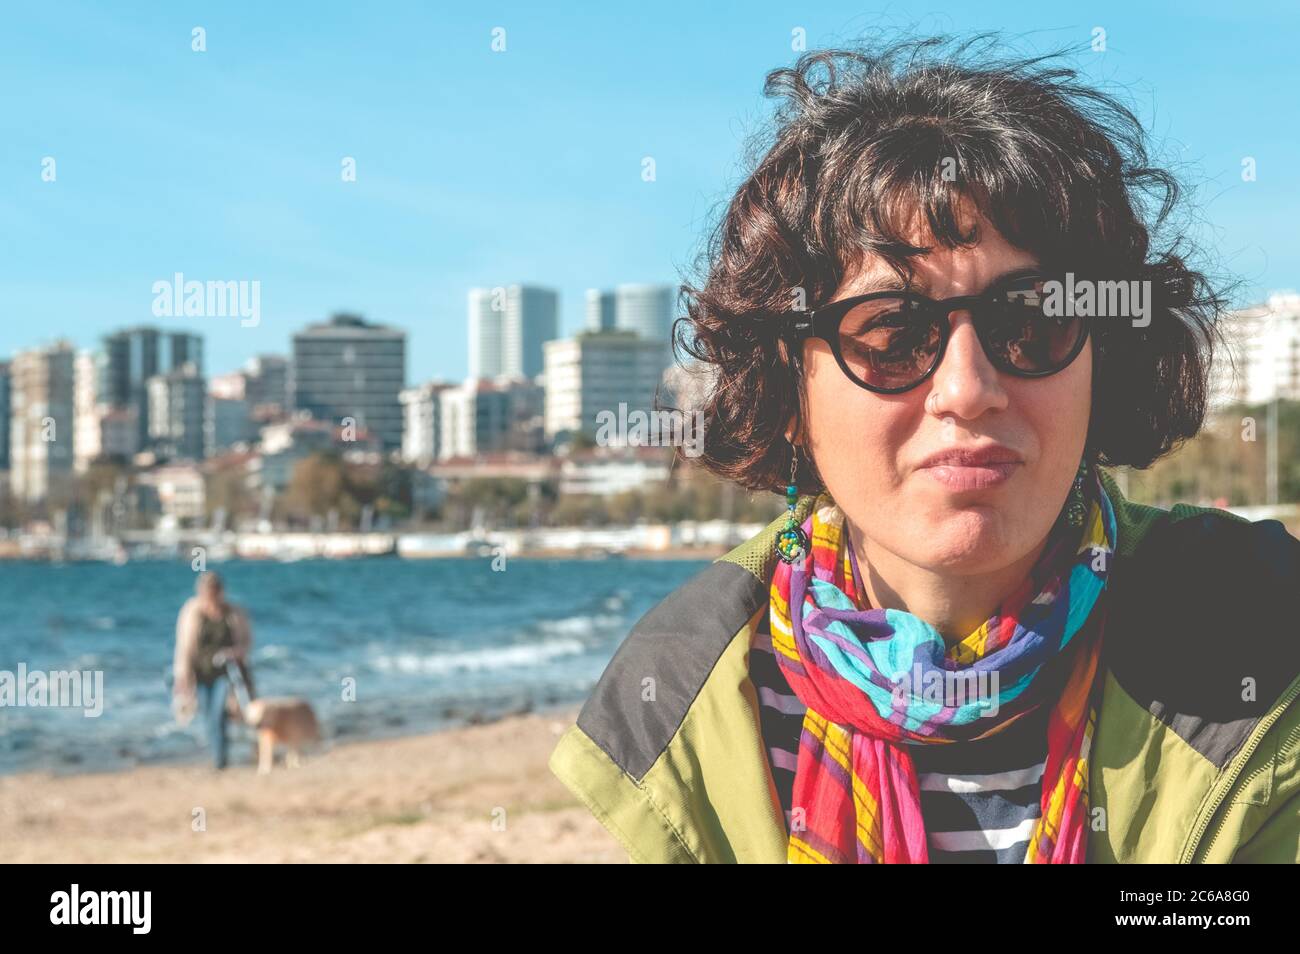 Outdoor portrait of a pretty curly woman with colorful clothing and sunglasses, sitting on the beach with a sea background. Urban lifestyle. Stock Photo